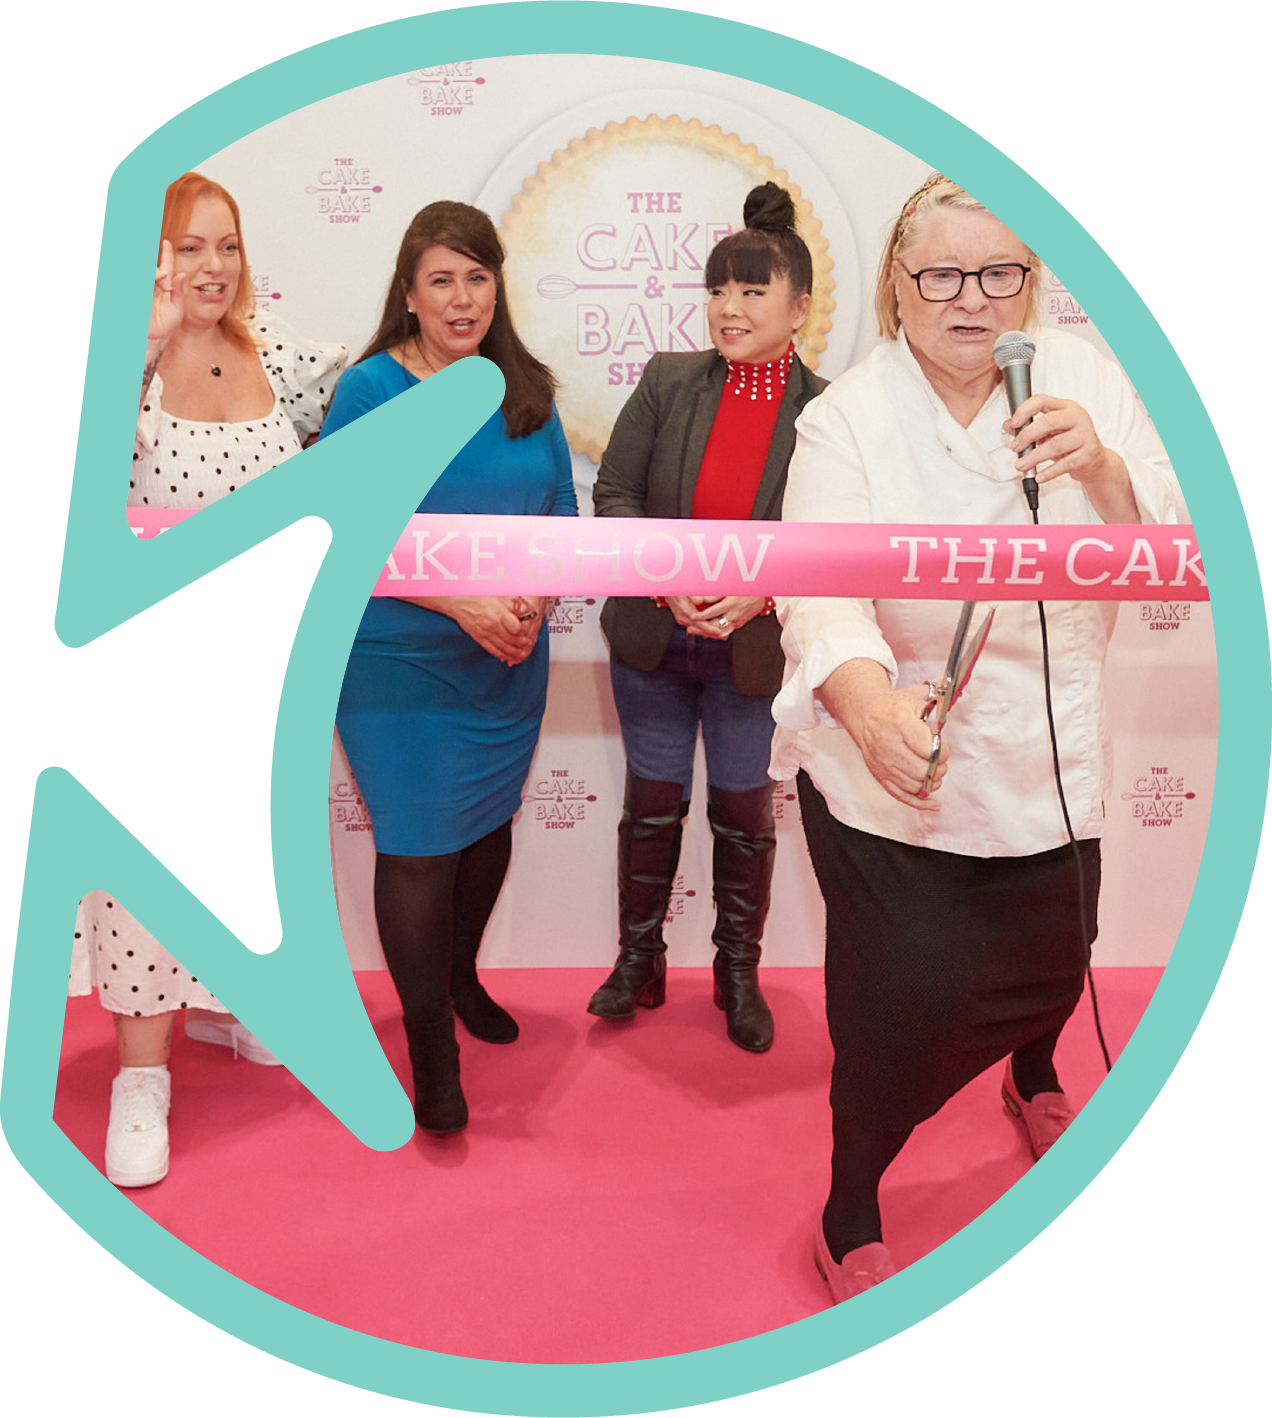 THE CAKE AND BAKE SHOW 2022 Image